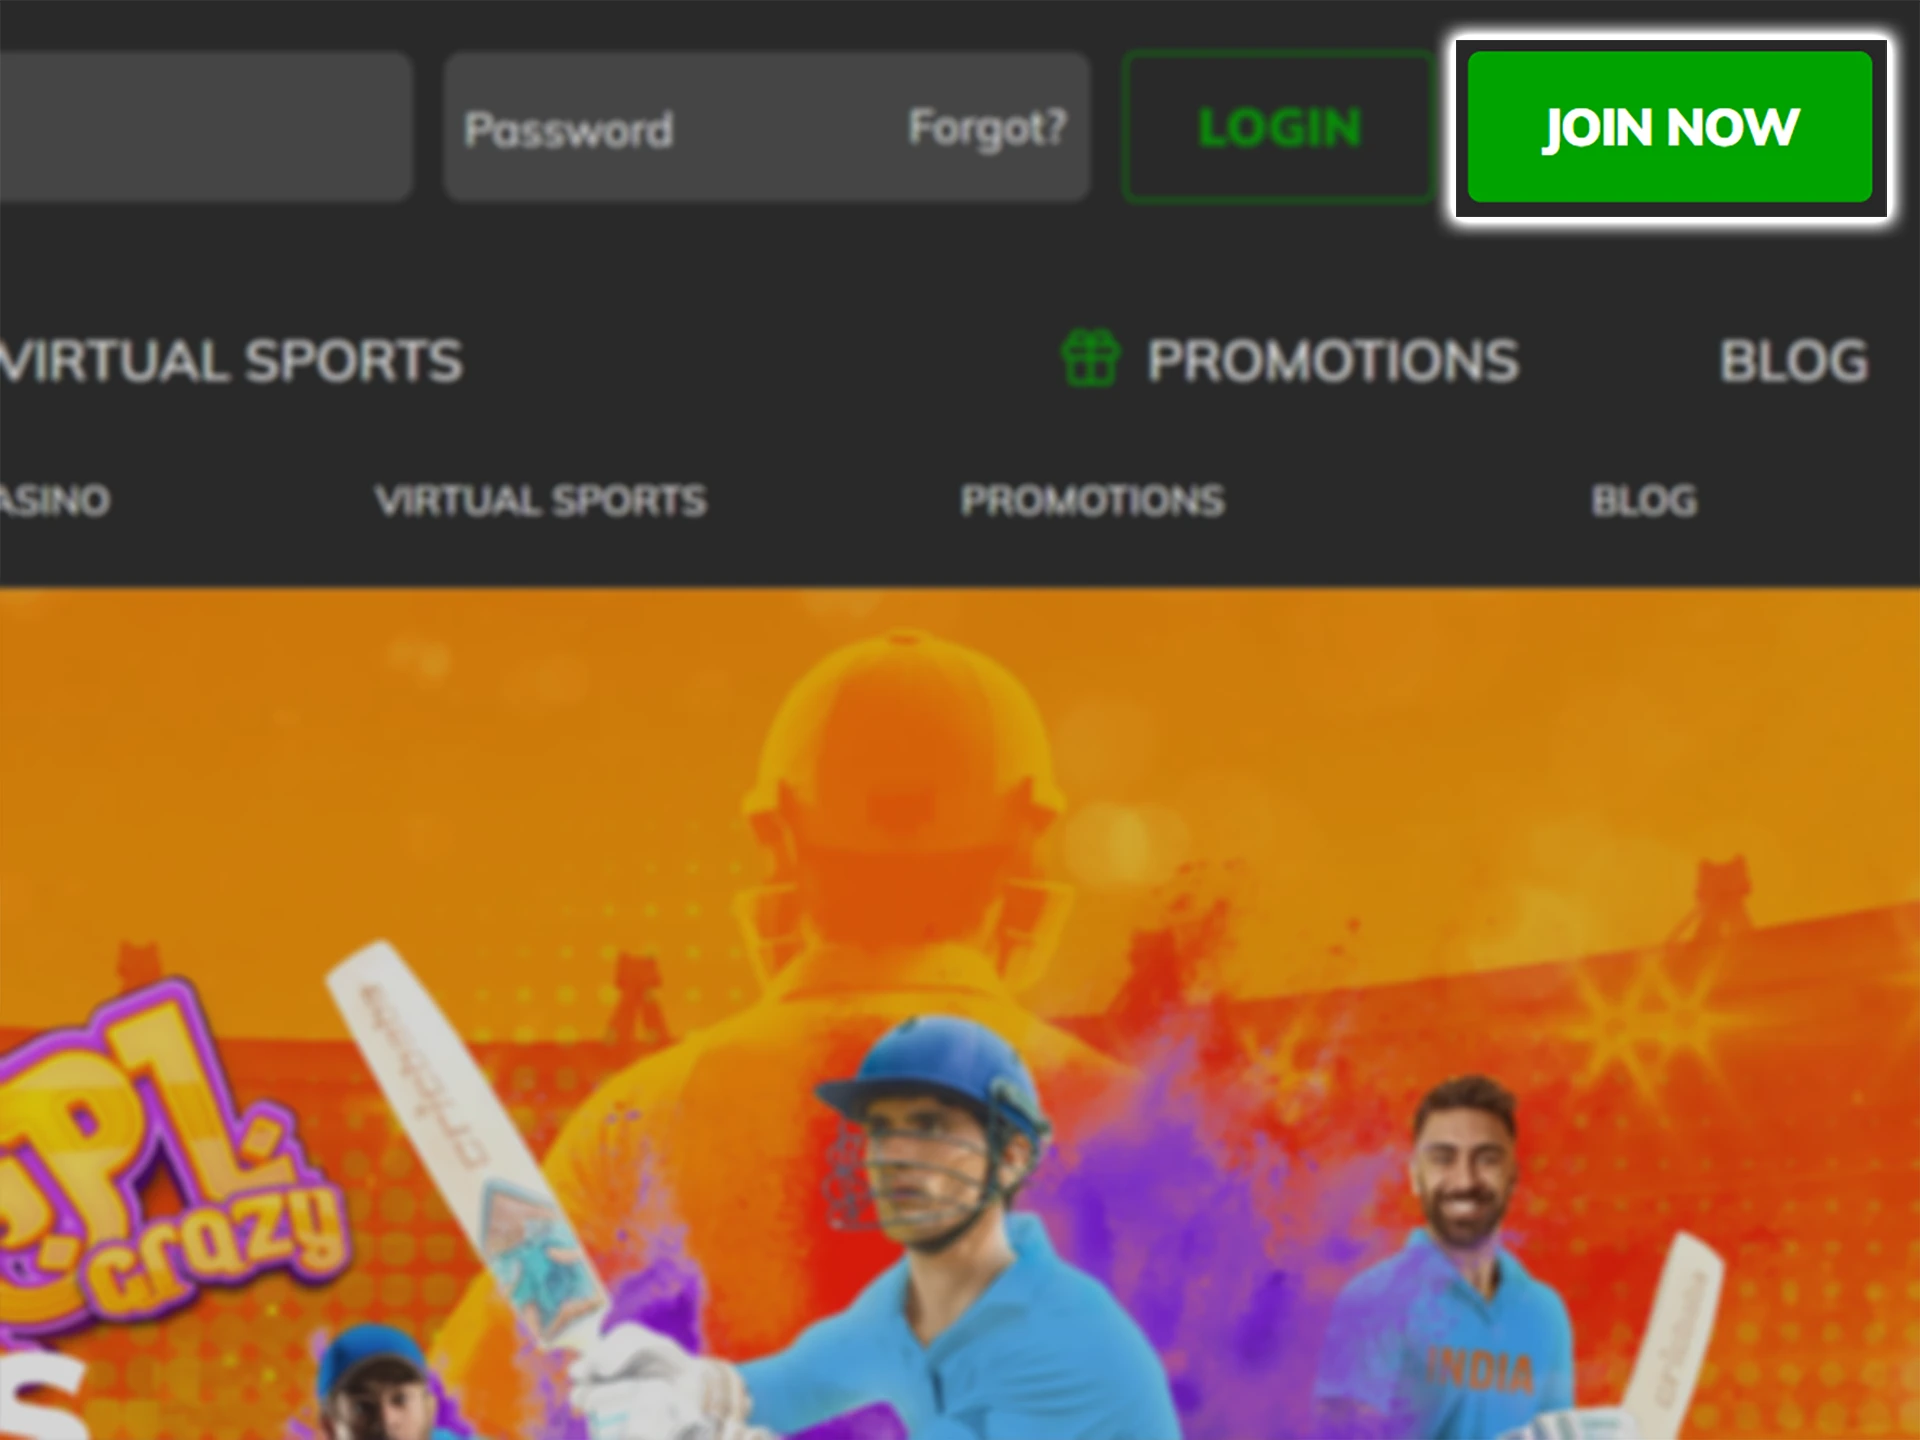 Find the sign up button on the Cricbaba homepage and click on it.